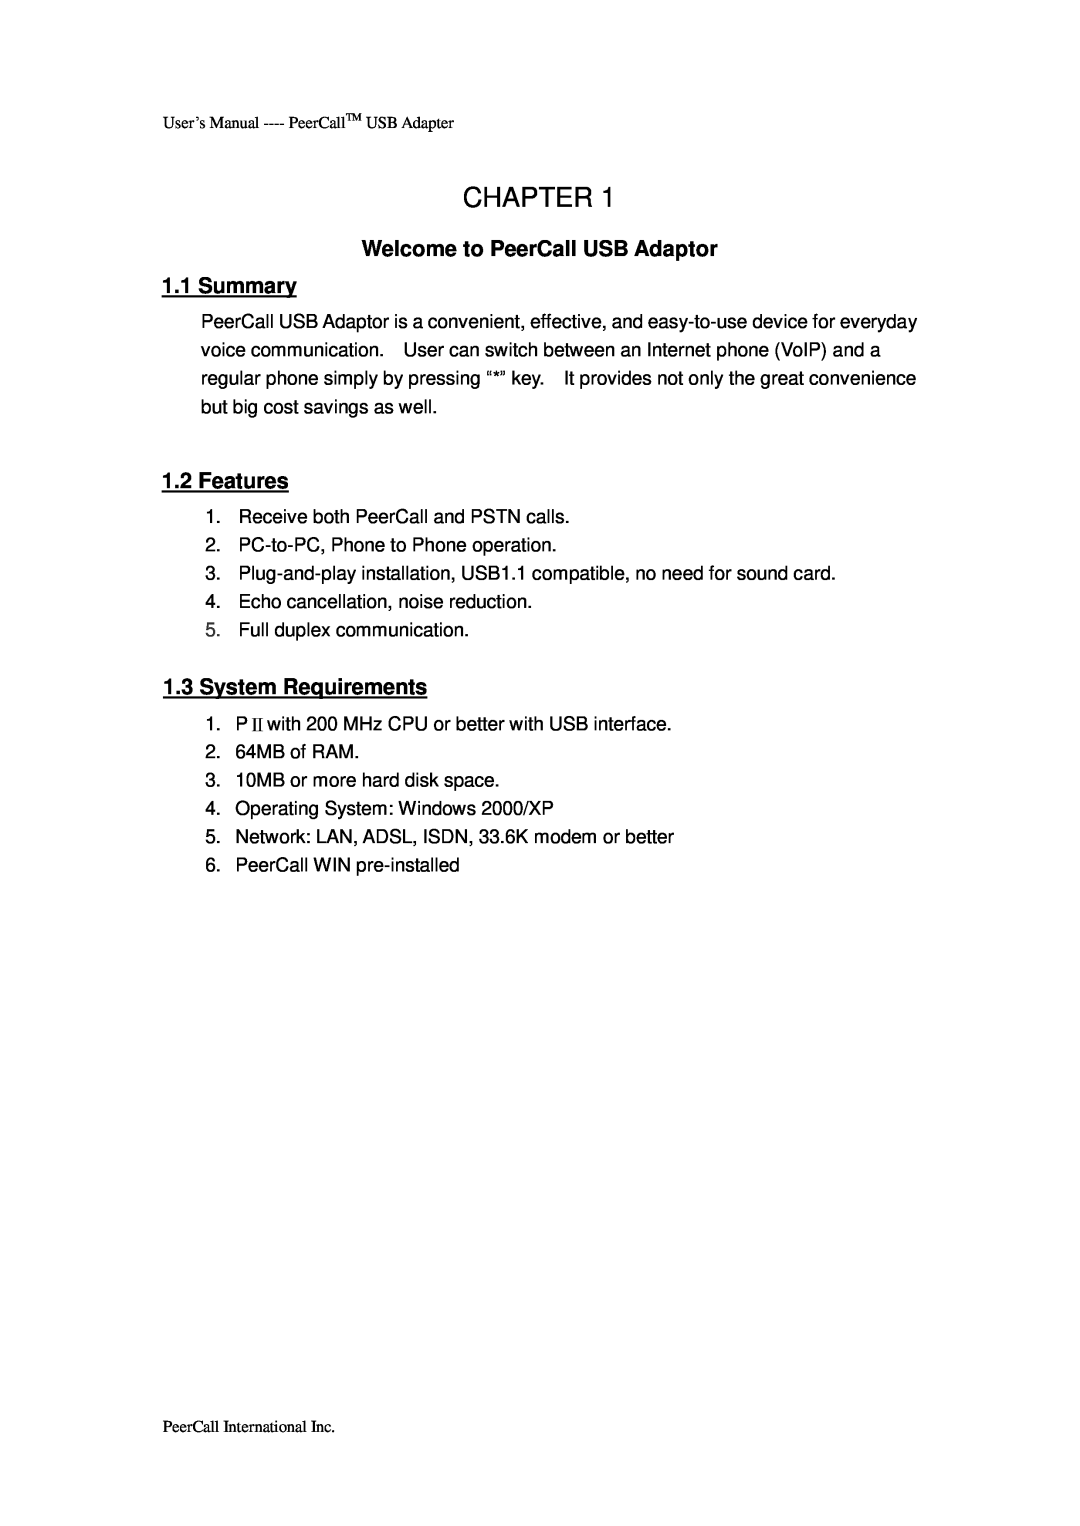 PeerCall manual Chapter, Welcome to PeerCall USB Adaptor 1.1 Summary, Features, System Requirements 